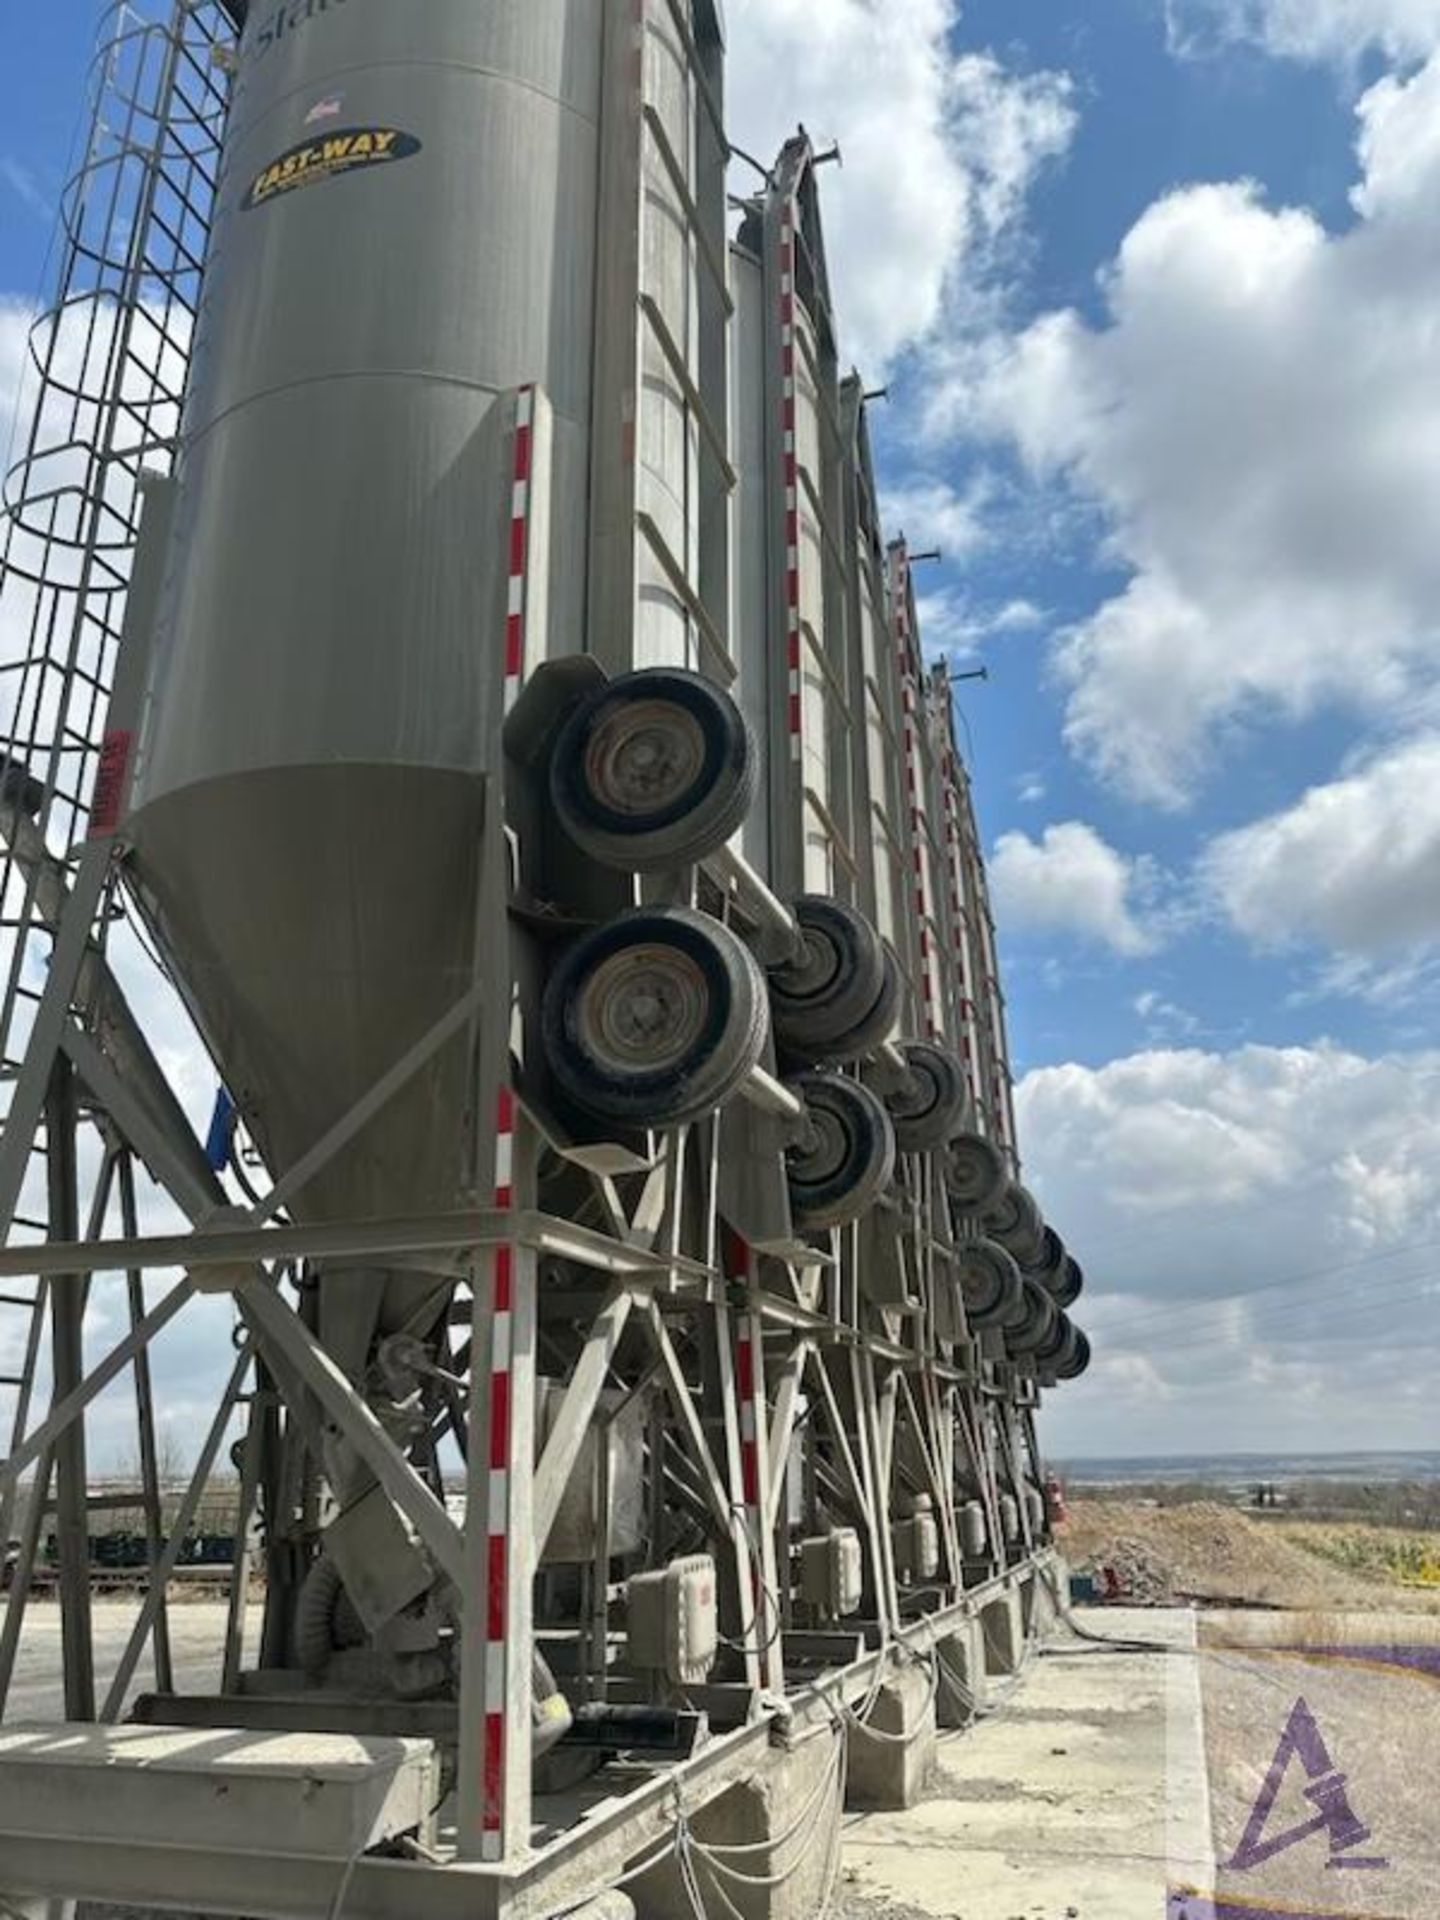 FAST-WAY Cement Silo Package Including: (12) 1,175 Cu Ft Portable Silos, Lots 86-98 - Image 6 of 24